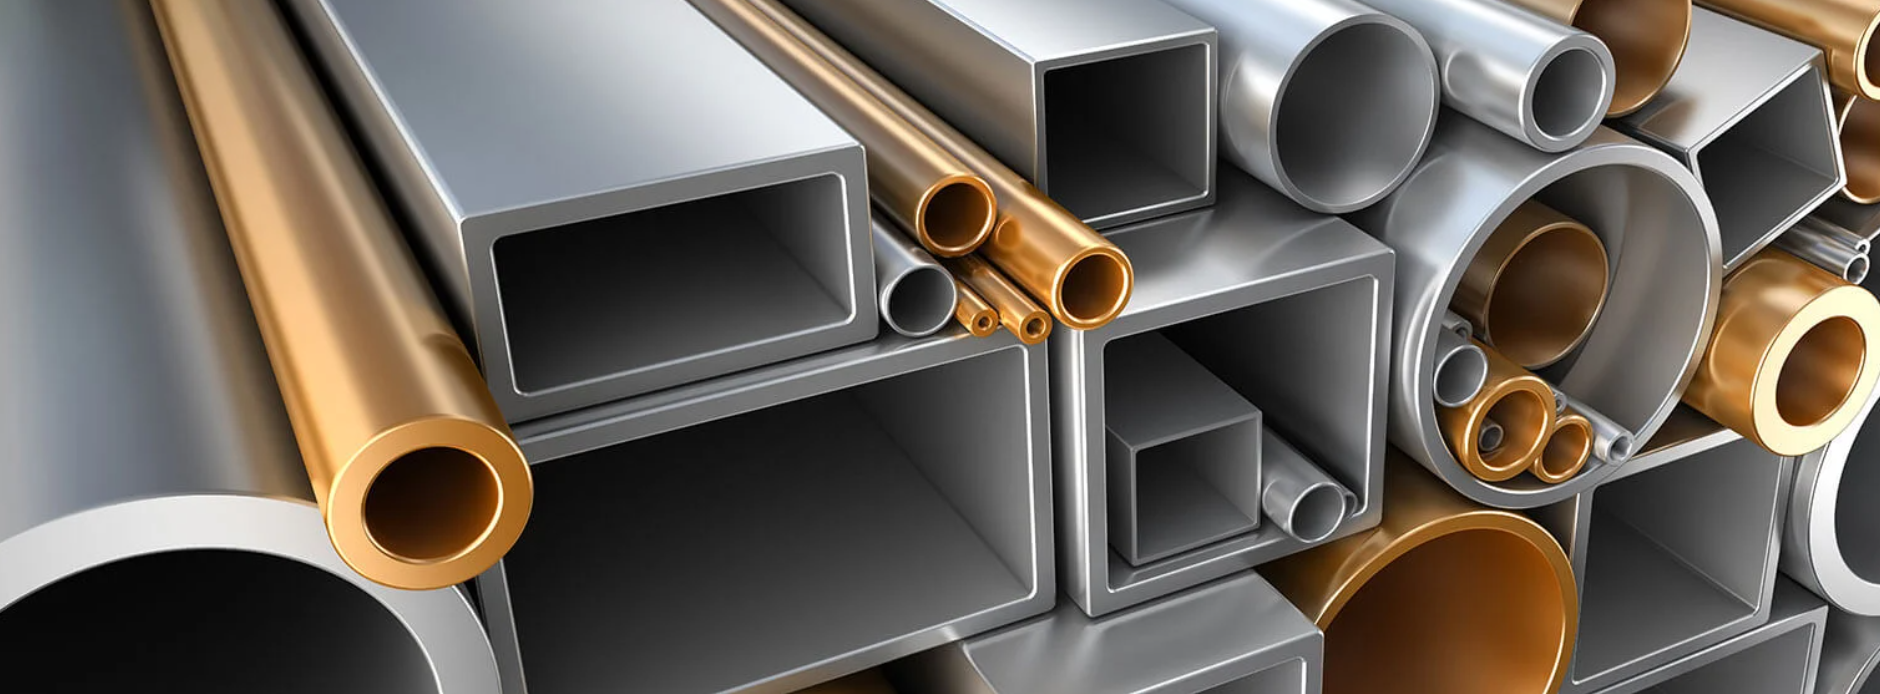 Consider tolerances when designing a product with extruded aluminium